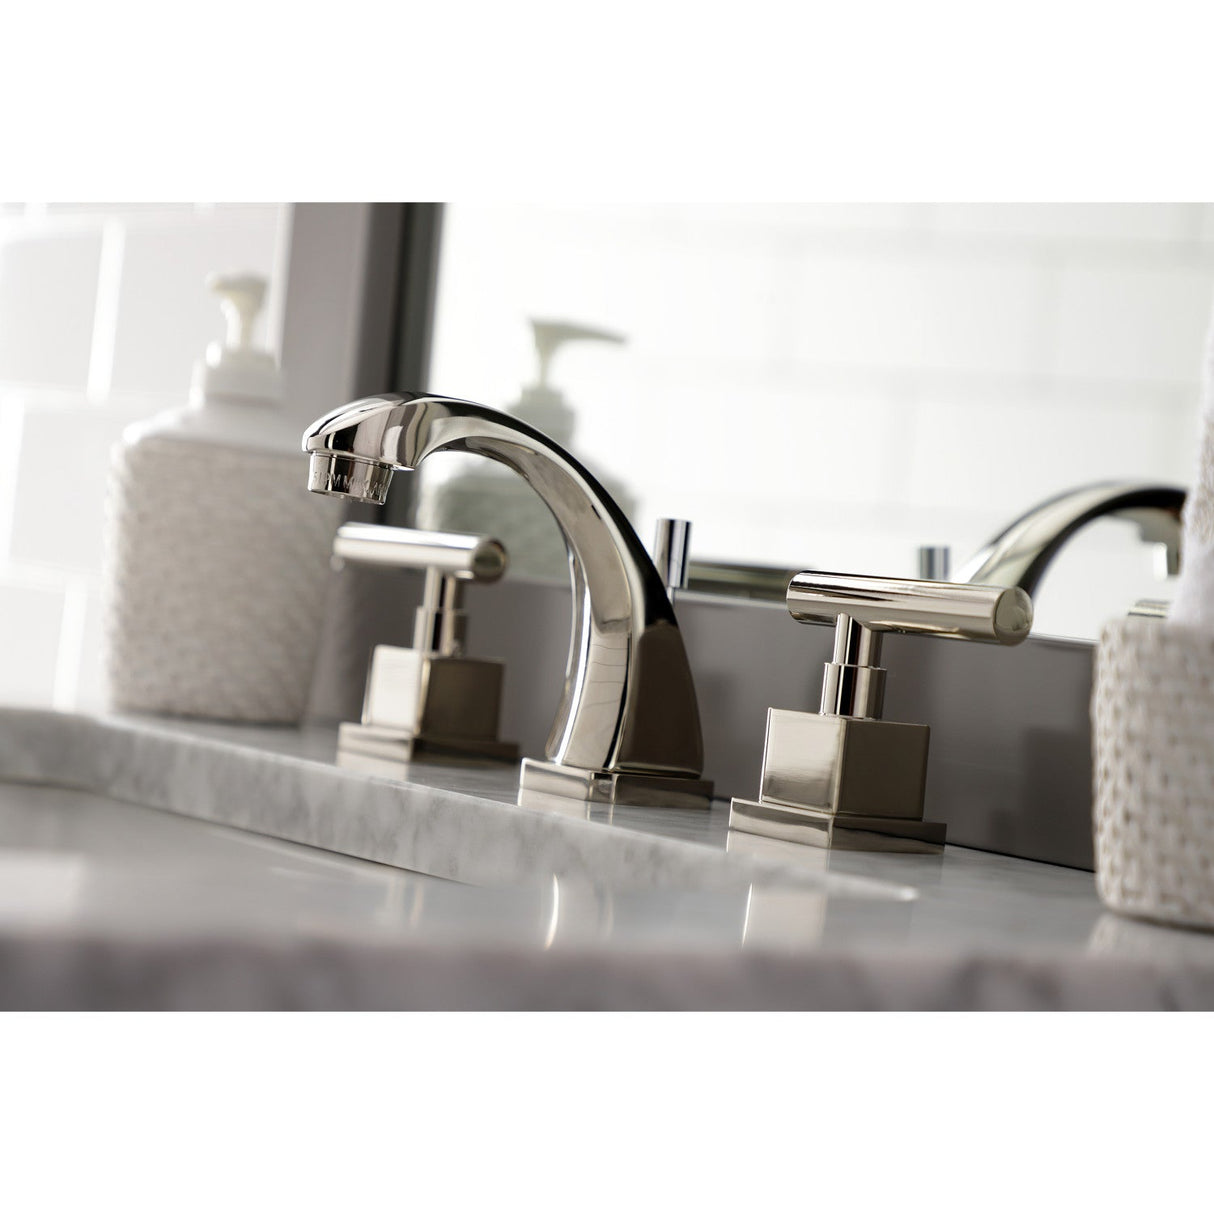 Claremont KS4946CQL Two-Handle 3-Hole Deck Mount Widespread Bathroom Faucet with Brass Pop-Up, Polished Nickel